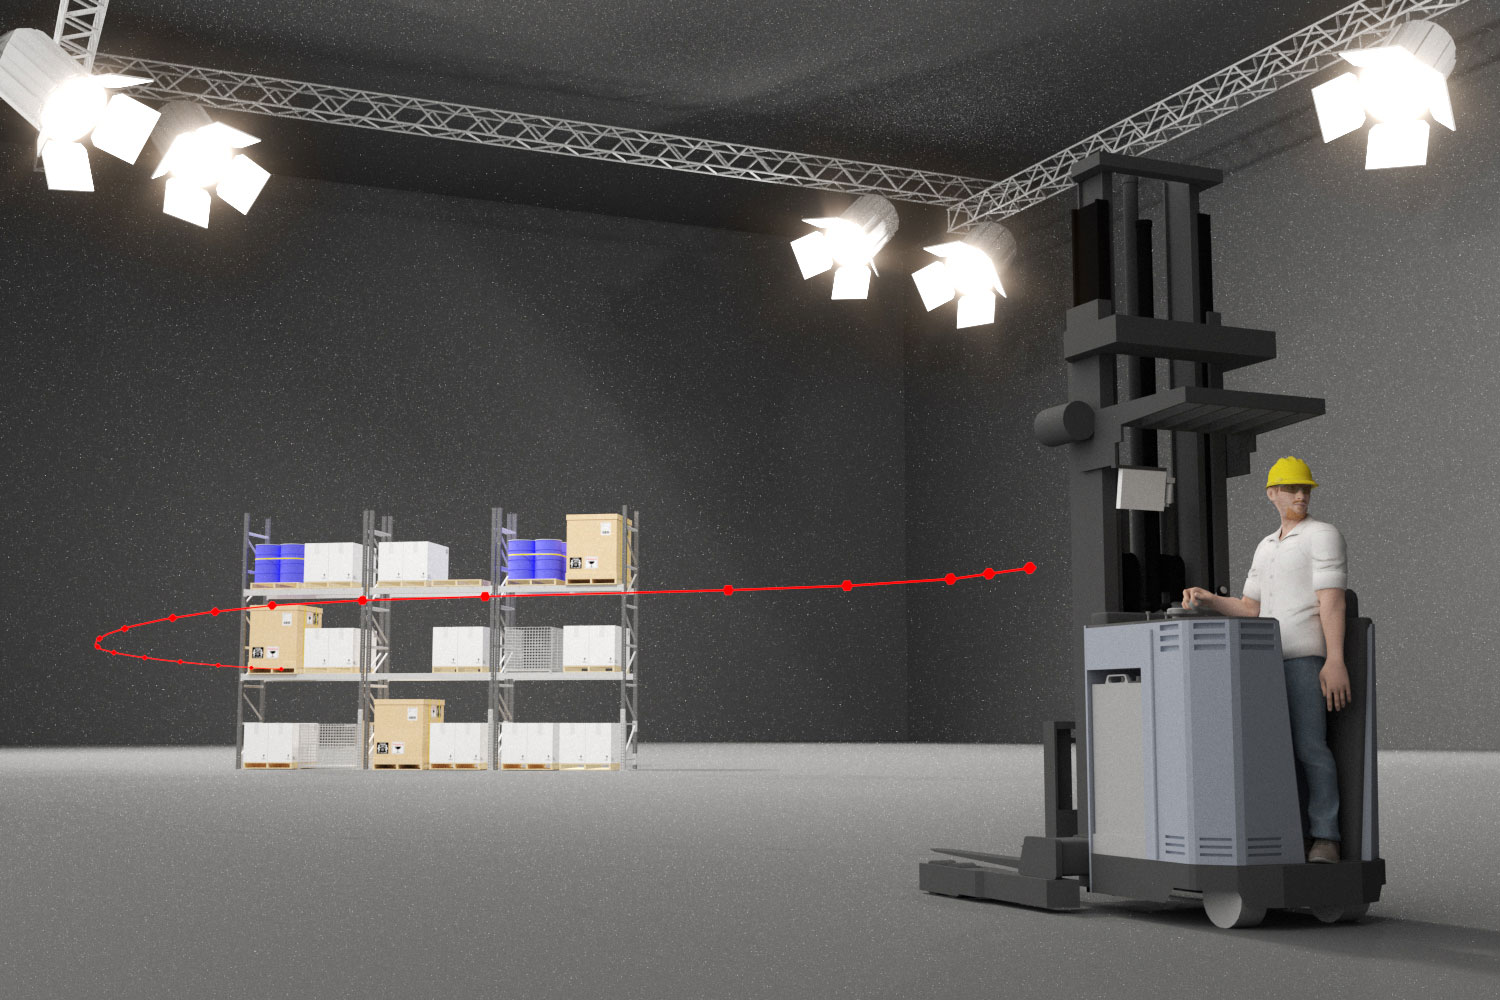 forklift-driver-in-large-room-with-shelving-unit